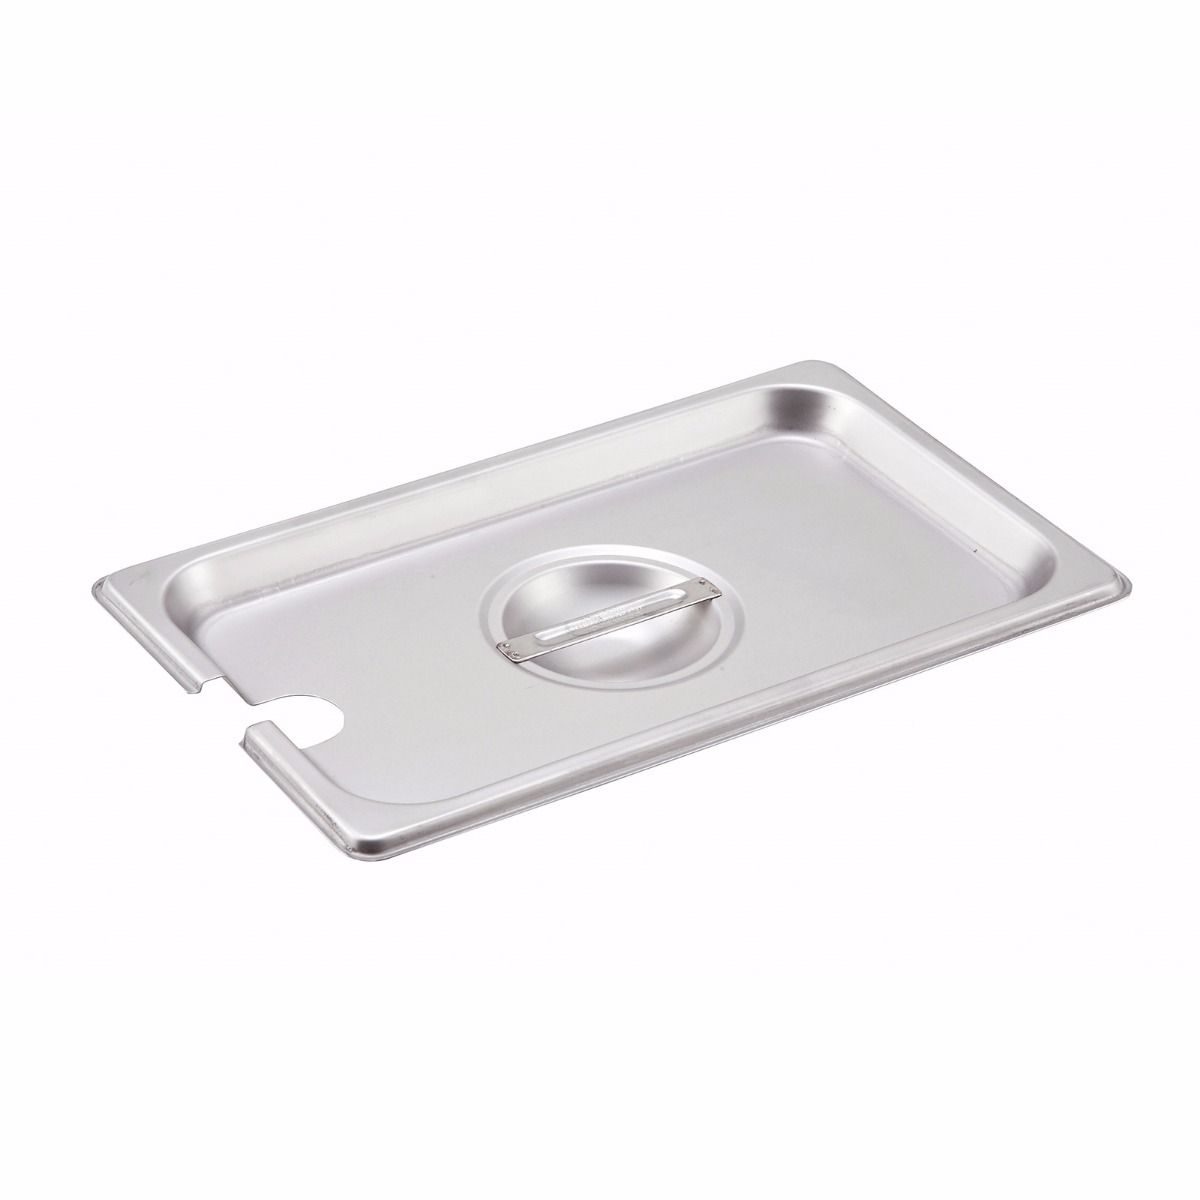 Full-Size Polycarbonate Food Pan Slotted Cover Winco SP7100C NSF 